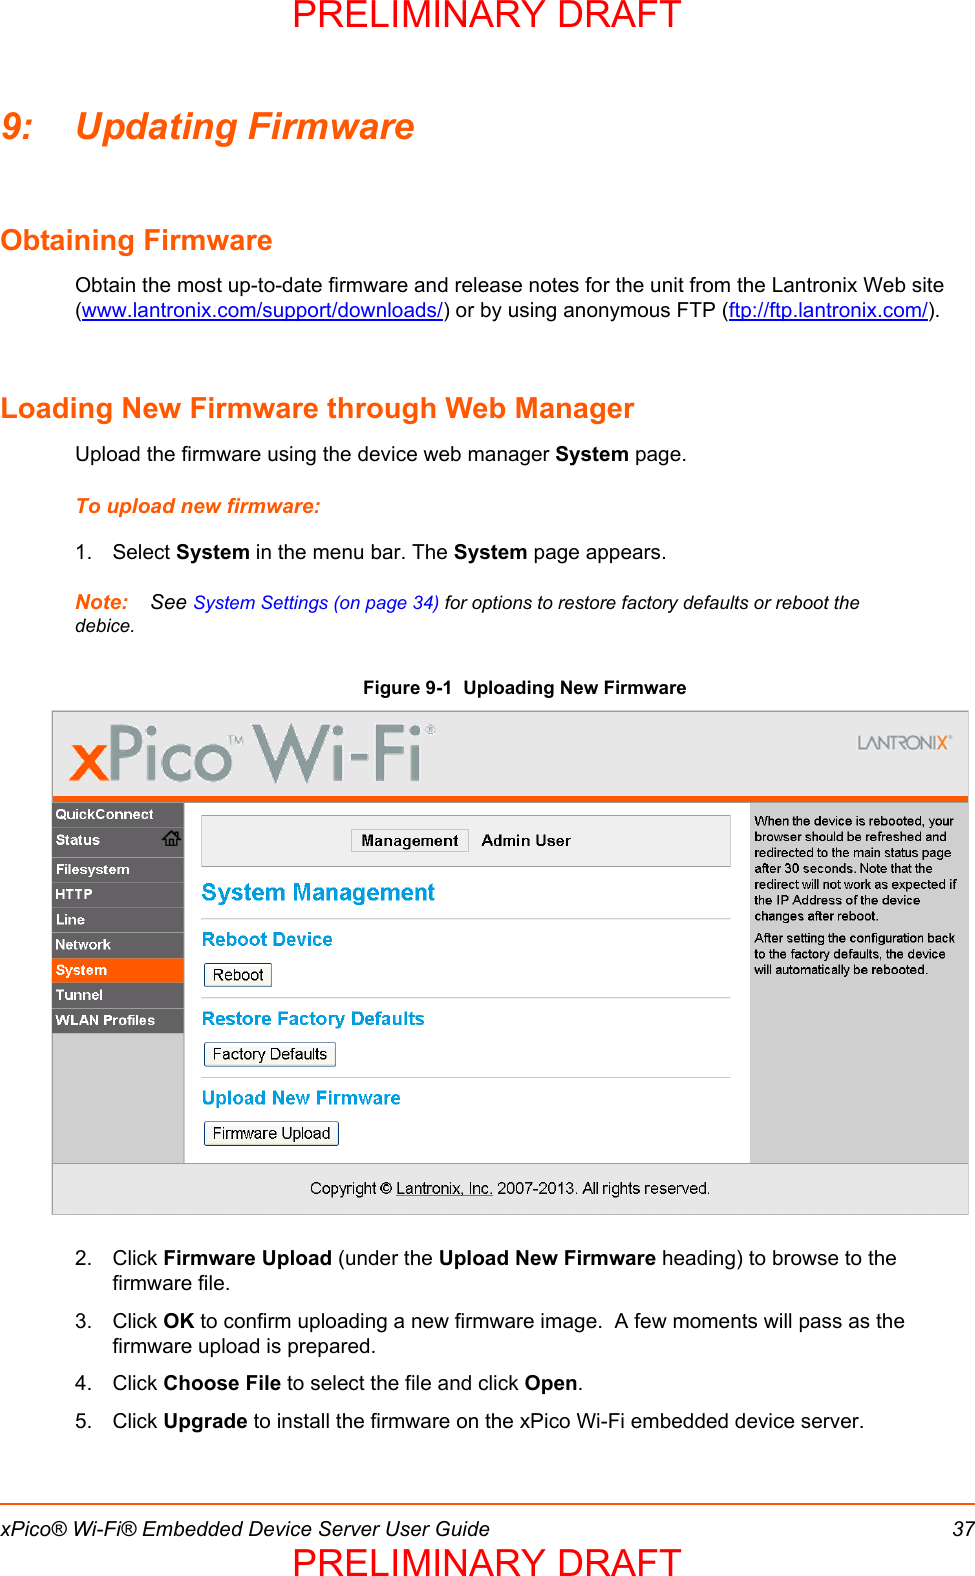 xPico® Wi-Fi® Embedded Device Server User Guide 379: Updating FirmwareObtaining FirmwareObtain the most up-to-date firmware and release notes for the unit from the Lantronix Web site (www.lantronix.com/support/downloads/) or by using anonymous FTP (ftp://ftp.lantronix.com/).Loading New Firmware through Web ManagerUpload the firmware using the device web manager System page.To upload new firmware:1. Select System in the menu bar. The System page appears.Note: See System Settings (on page 34) for options to restore factory defaults or reboot the debice.Figure 9-1  Uploading New Firmware2. Click Firmware Upload (under the Upload New Firmware heading) to browse to the firmware file.3. Click OK to confirm uploading a new firmware image.  A few moments will pass as the firmware upload is prepared.4. Click Choose File to select the file and click Open.5. Click Upgrade to install the firmware on the xPico Wi-Fi embedded device server. PRELIMINARY DRAFTPRELIMINARY DRAFT